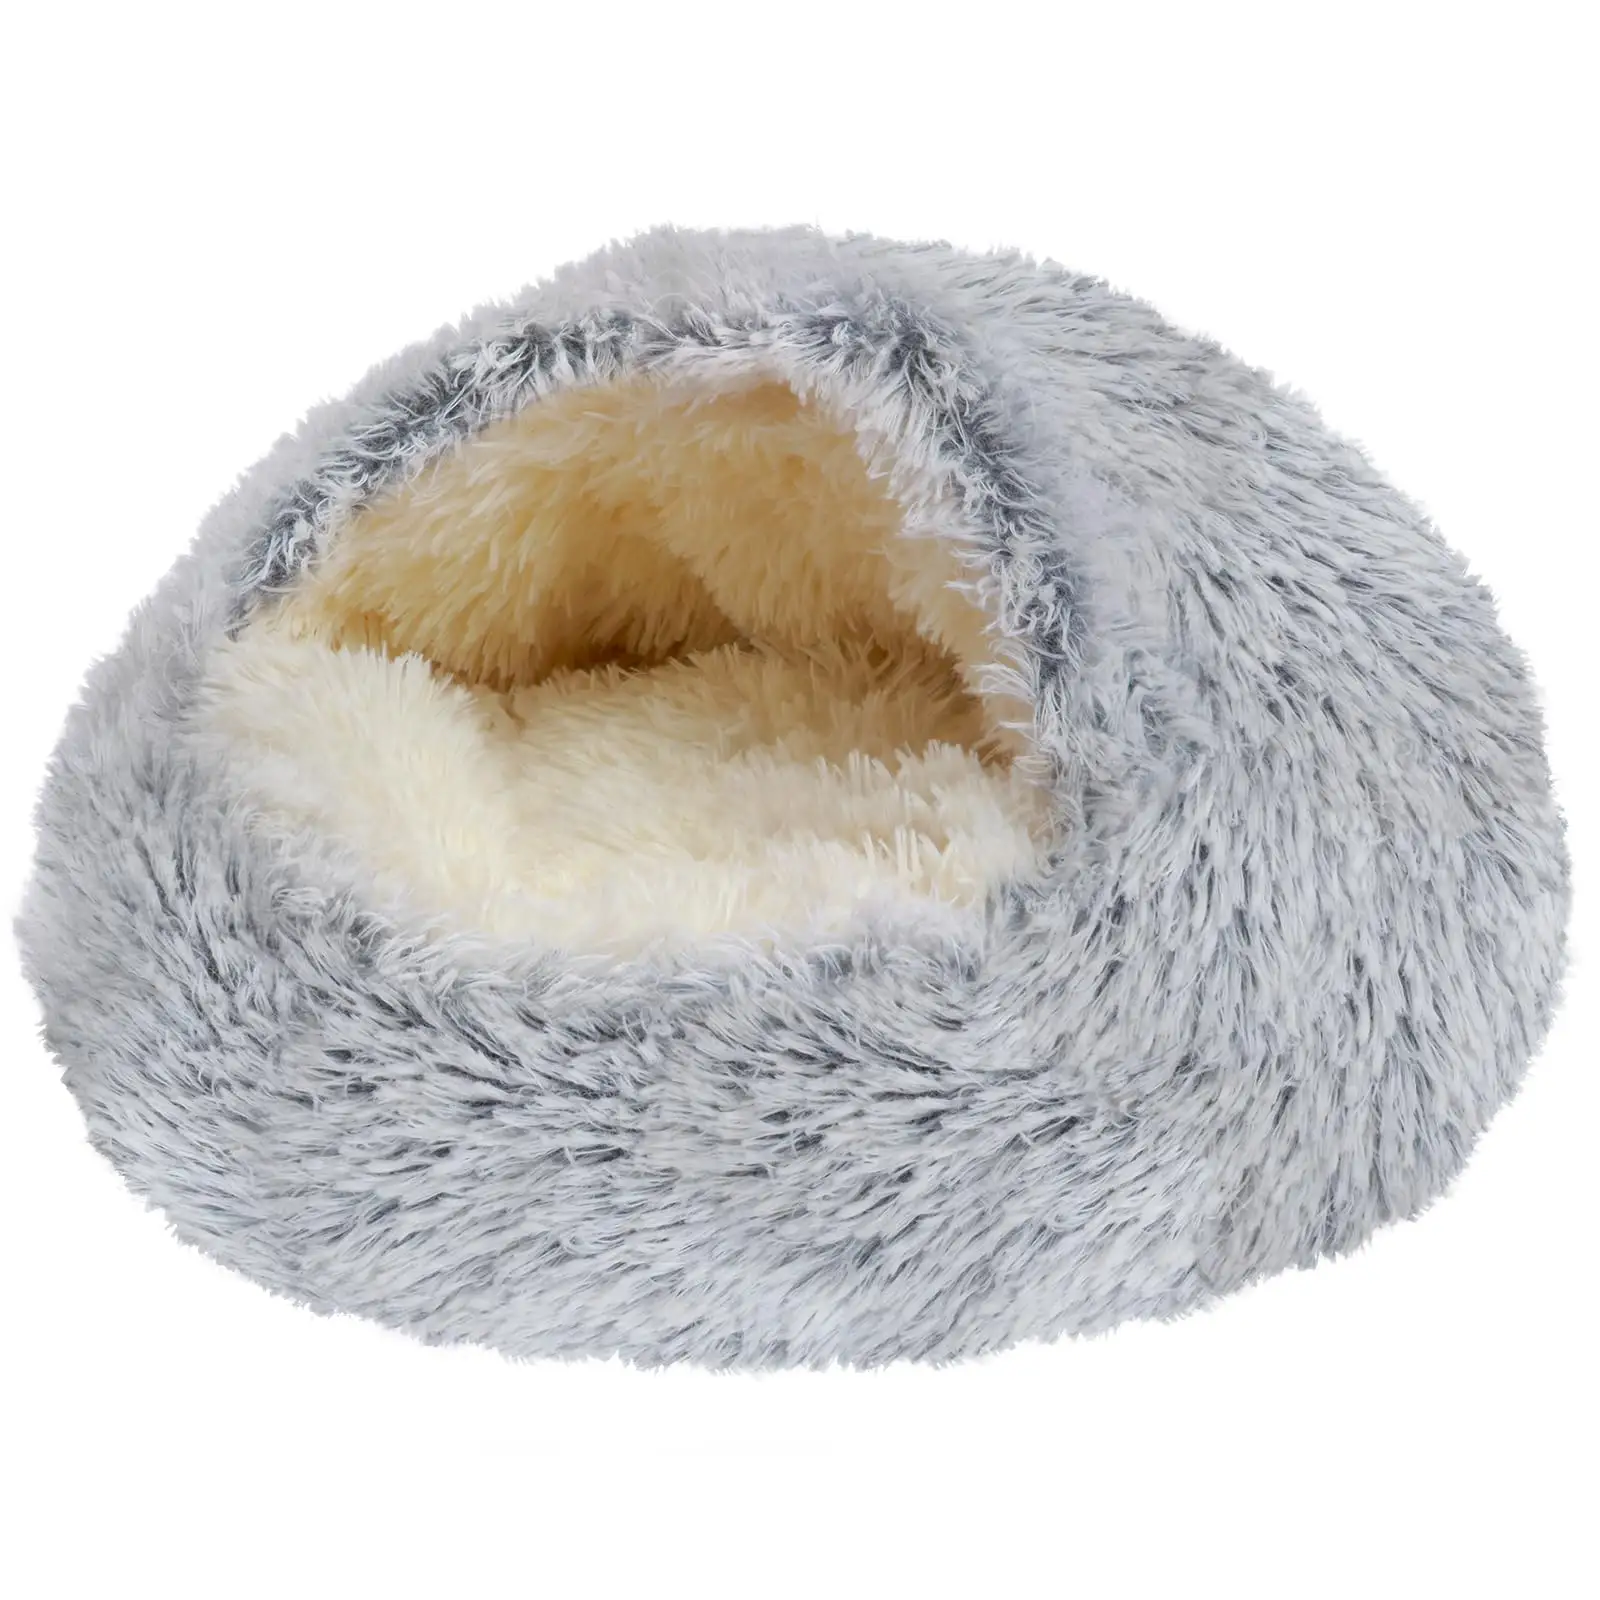 Wholesale Dog Bed Round Hooded Plush Cat Cave Donut Anti Anxiety Fluffy Dog Bed for Small Medium Dog and Cat